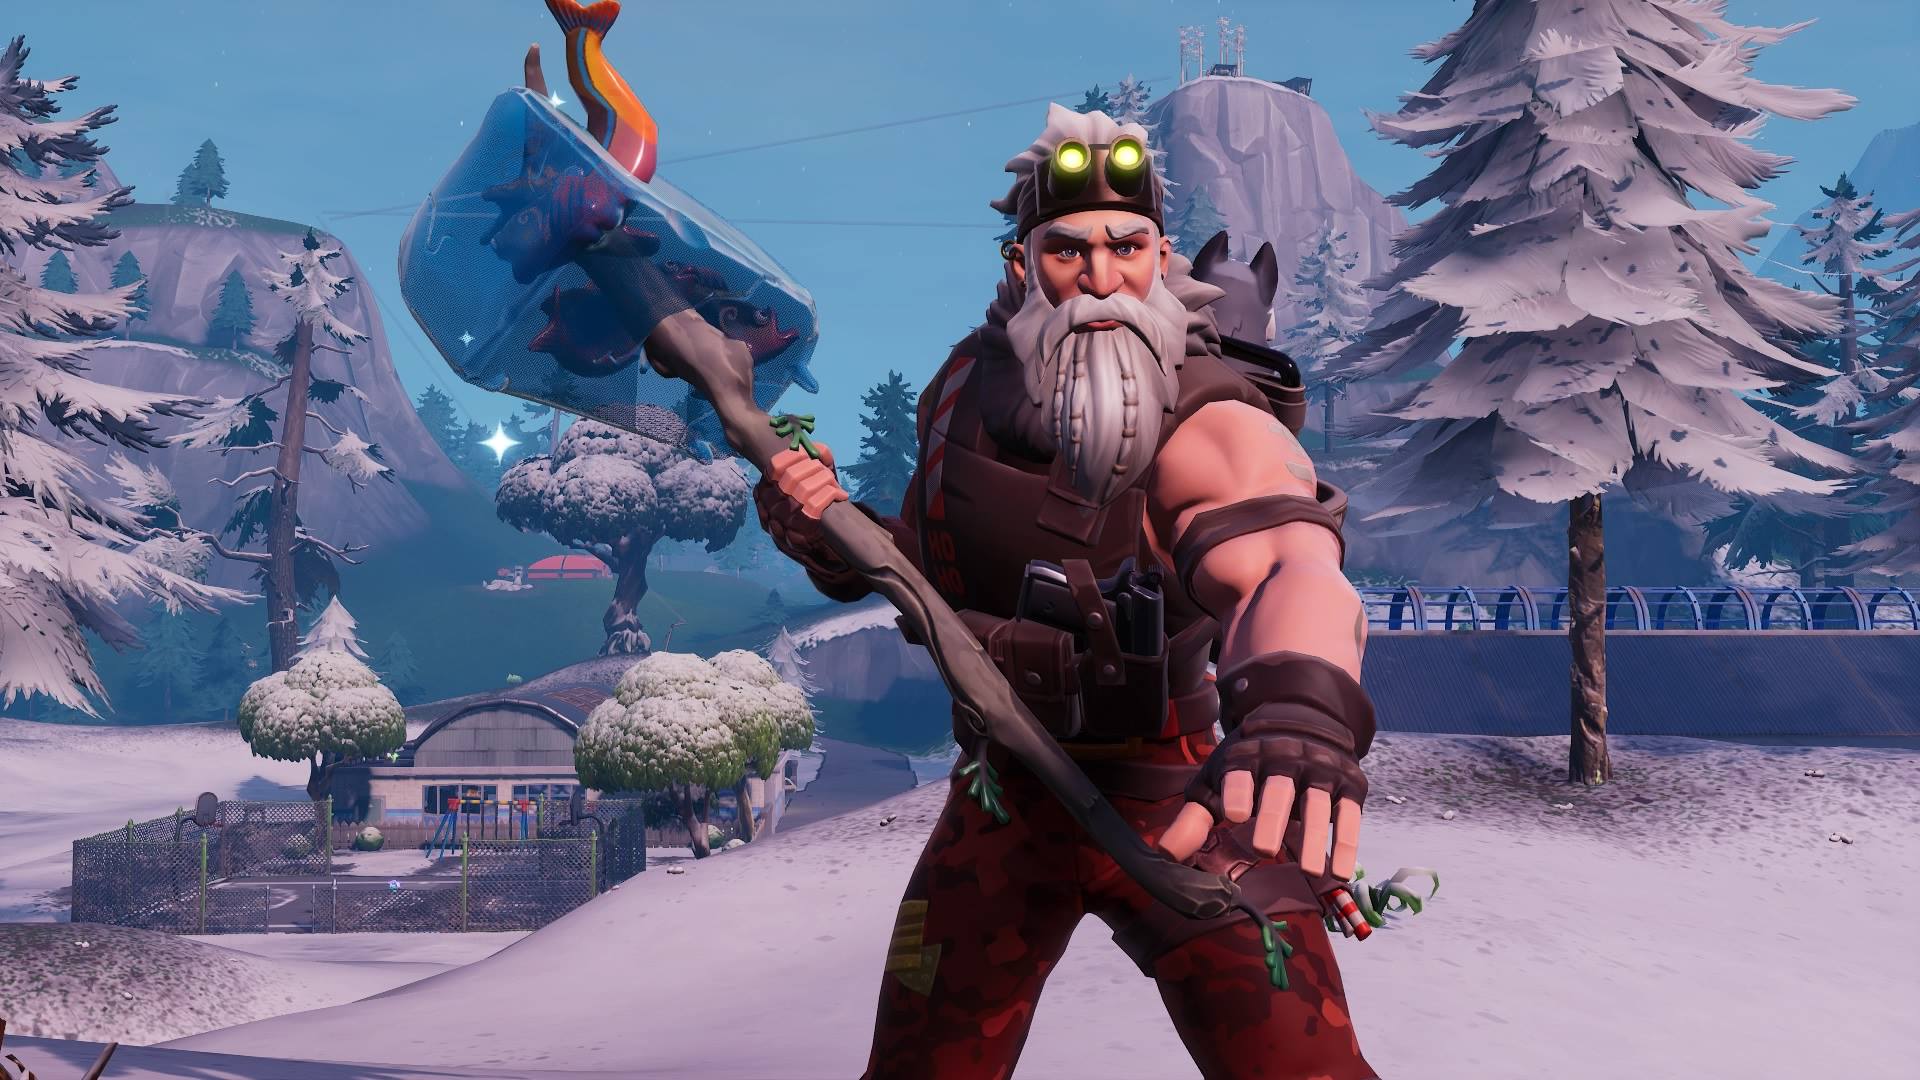 Fortnite Chilly Gnomes Locations Map Where To Search Them In Week - fortnite chilly gnomes locations map where to search them in week 6 inverse